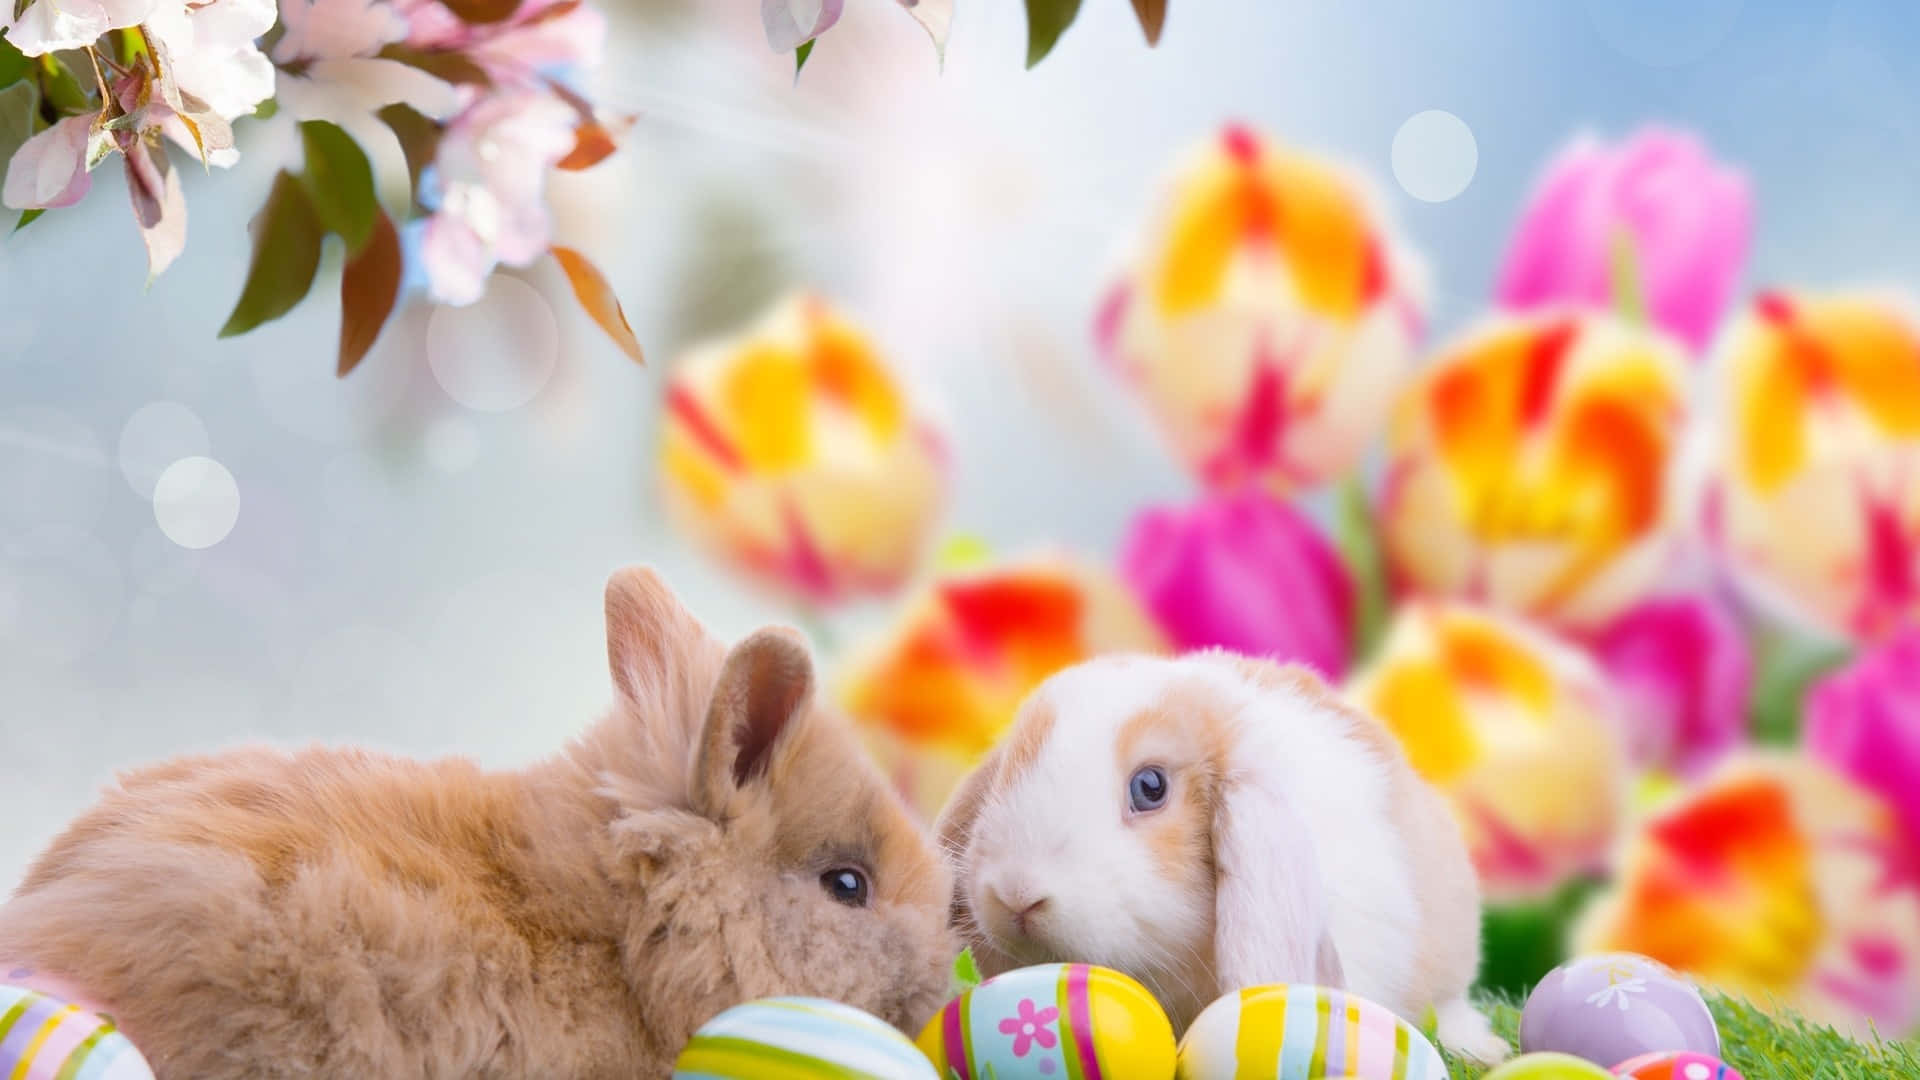 Adorable Easter Bunnies and Colorful Eggs on a Vibrant Springtime Background